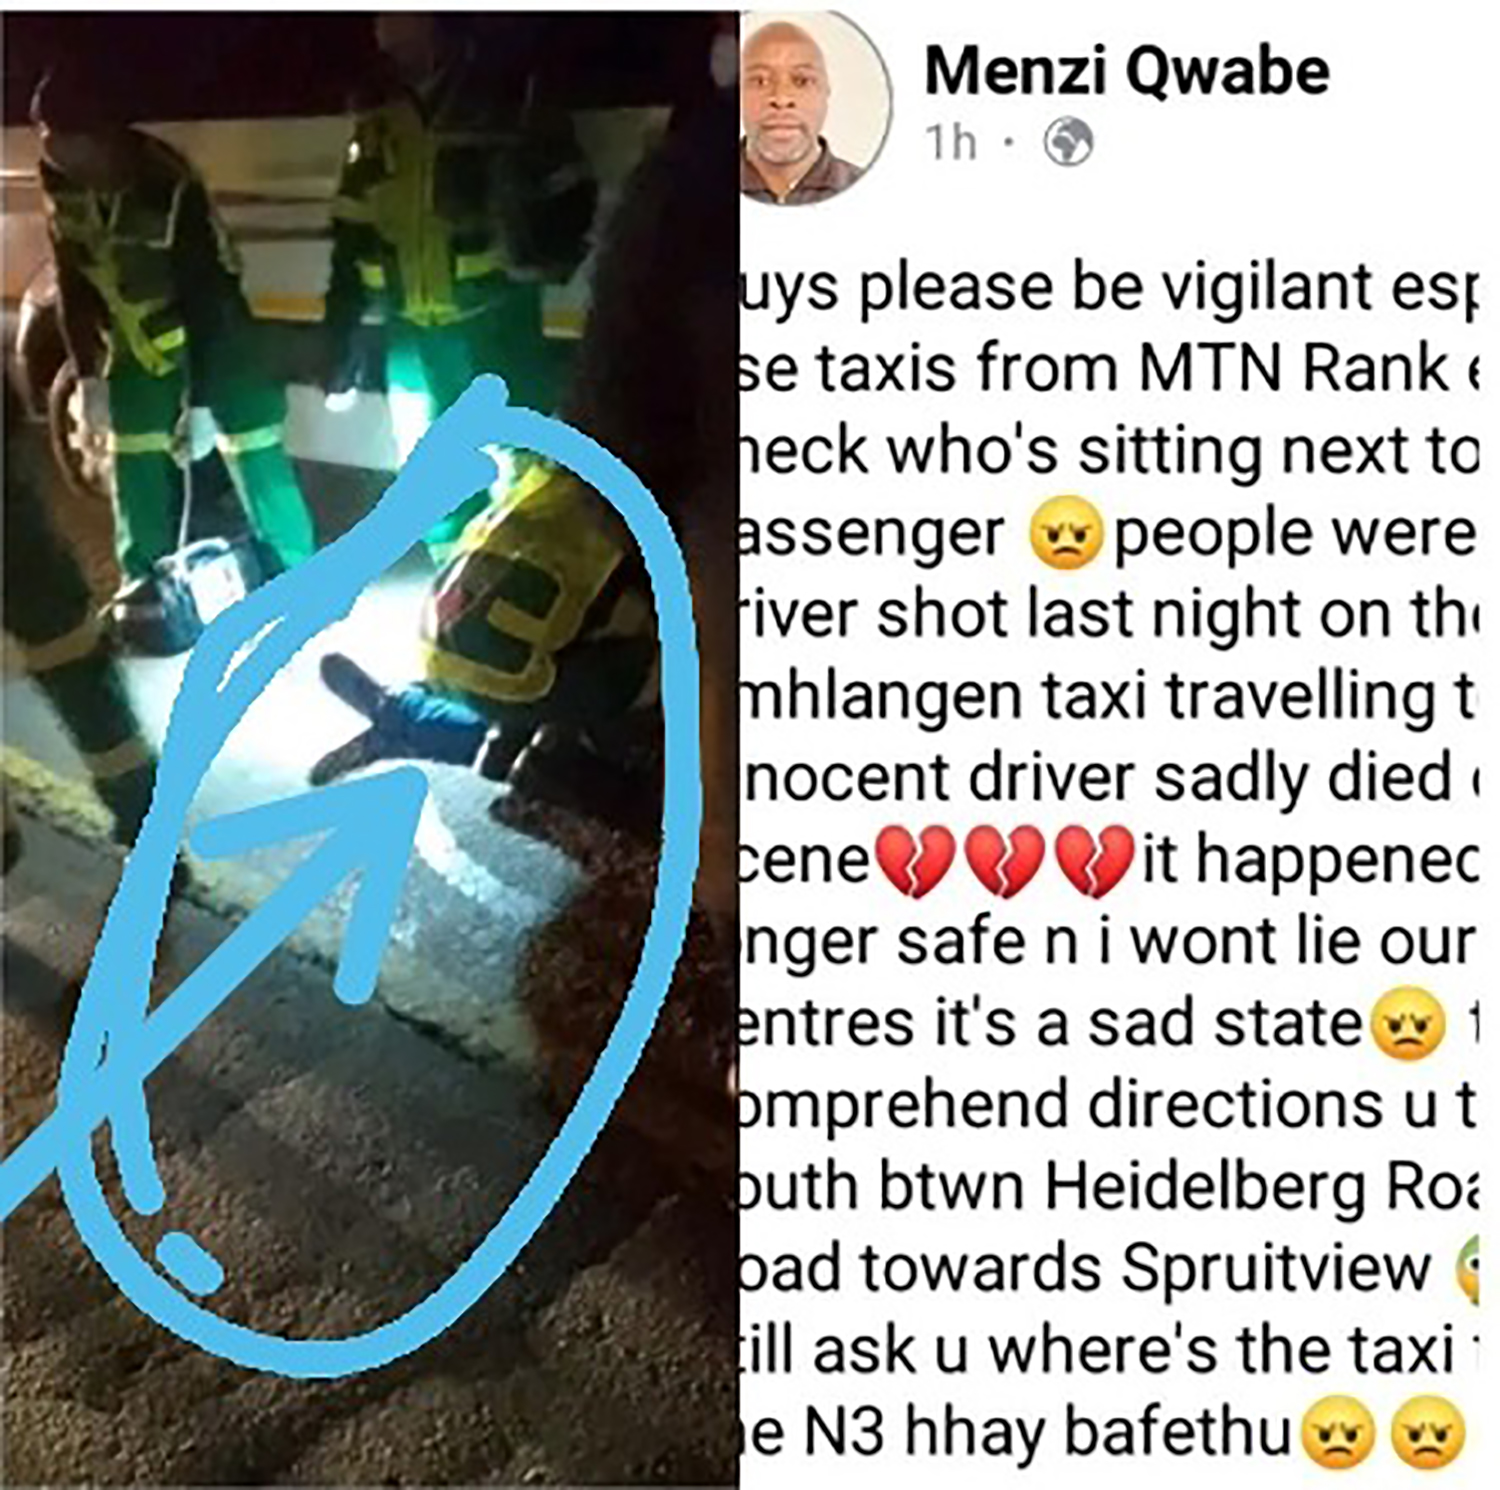 People be careful those using taxis from MTN taxi rank people were robbed man was killed 2